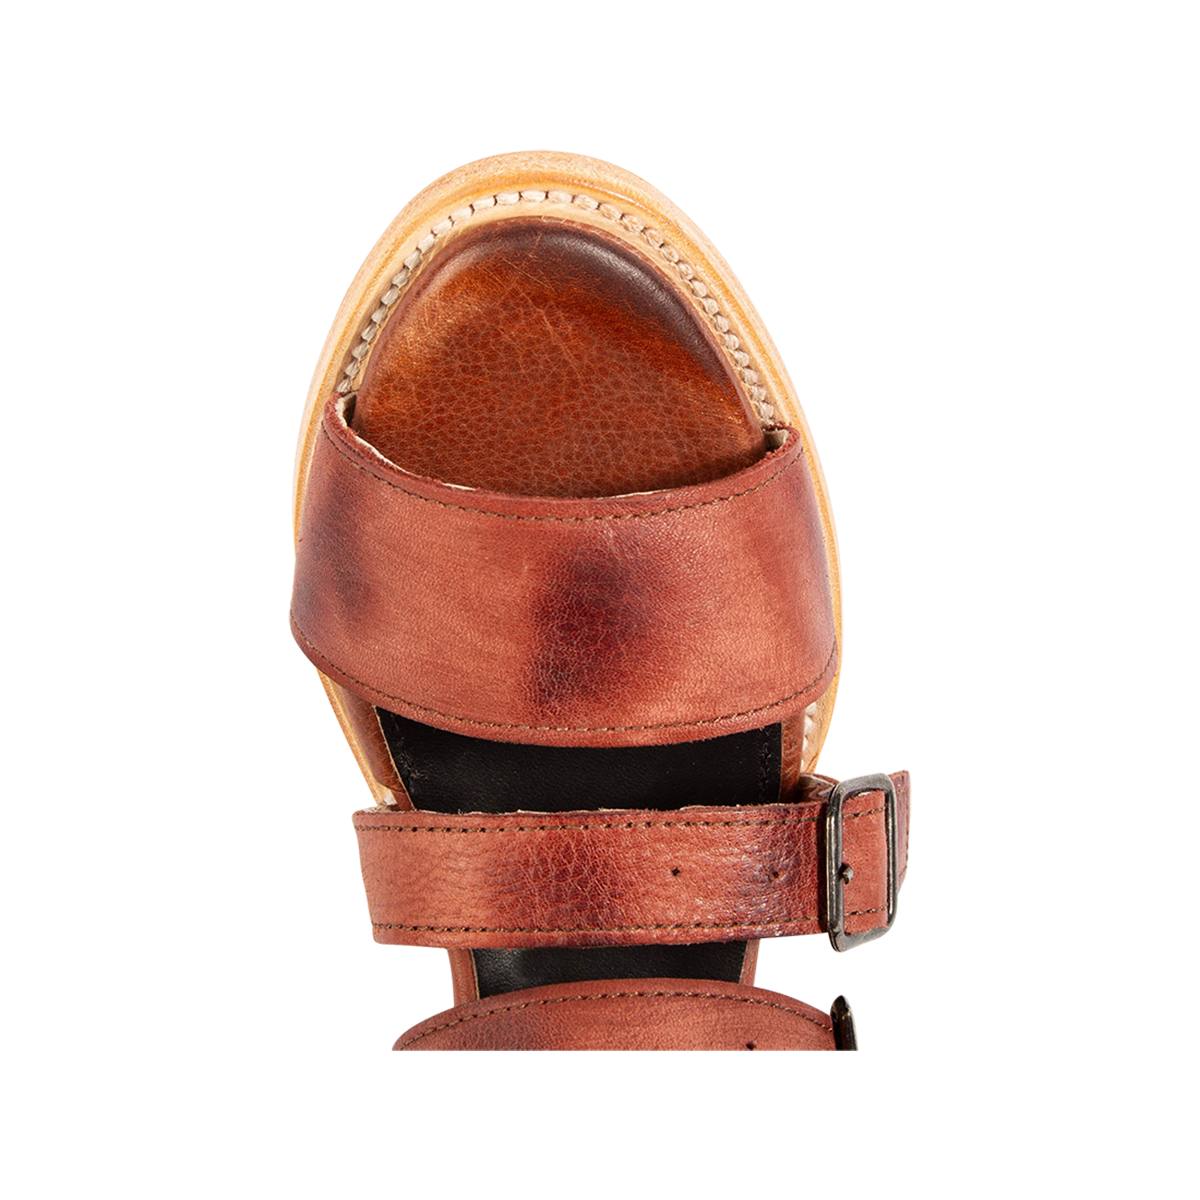 Top view showing open toe construction on FREEBIRD women's Country rust snake multi embossed leather sandal